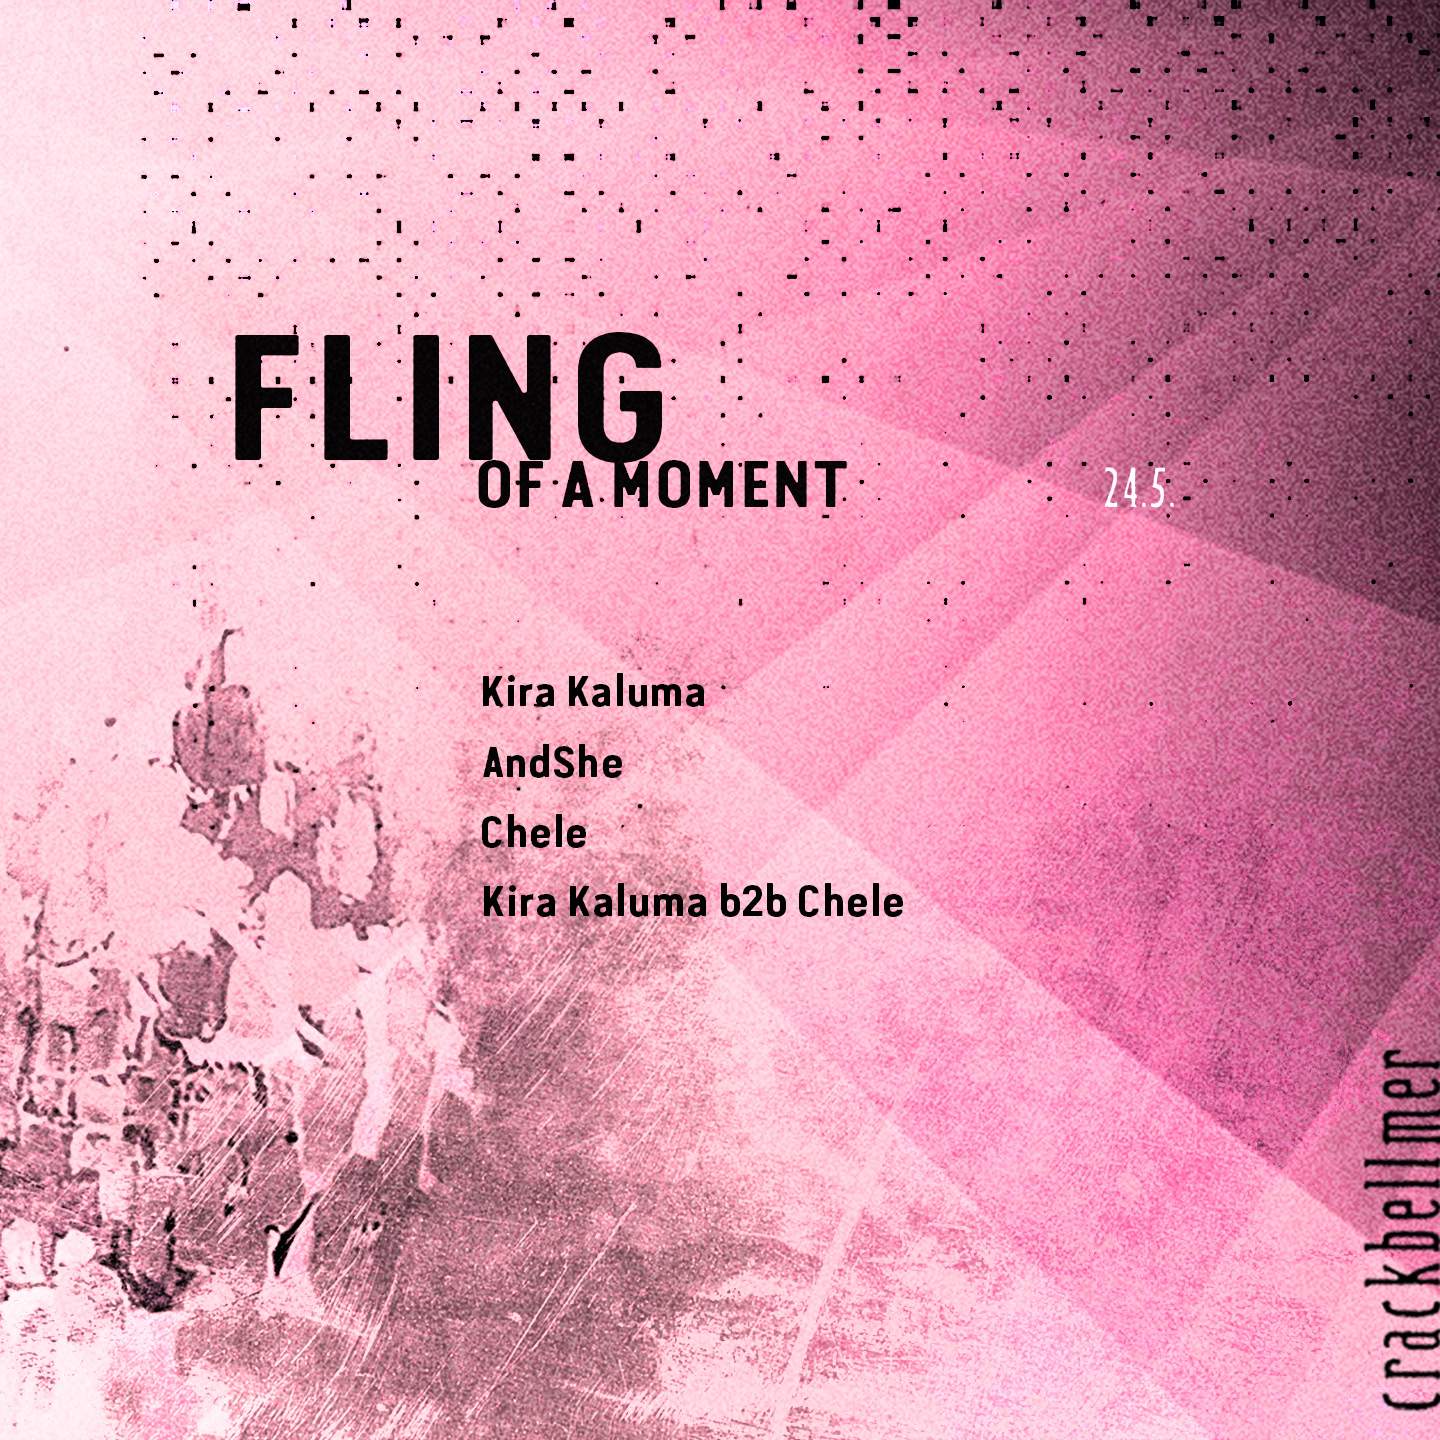 Fling of a Moment with Kira Kaluma, AndShe, Chele - フライヤー裏